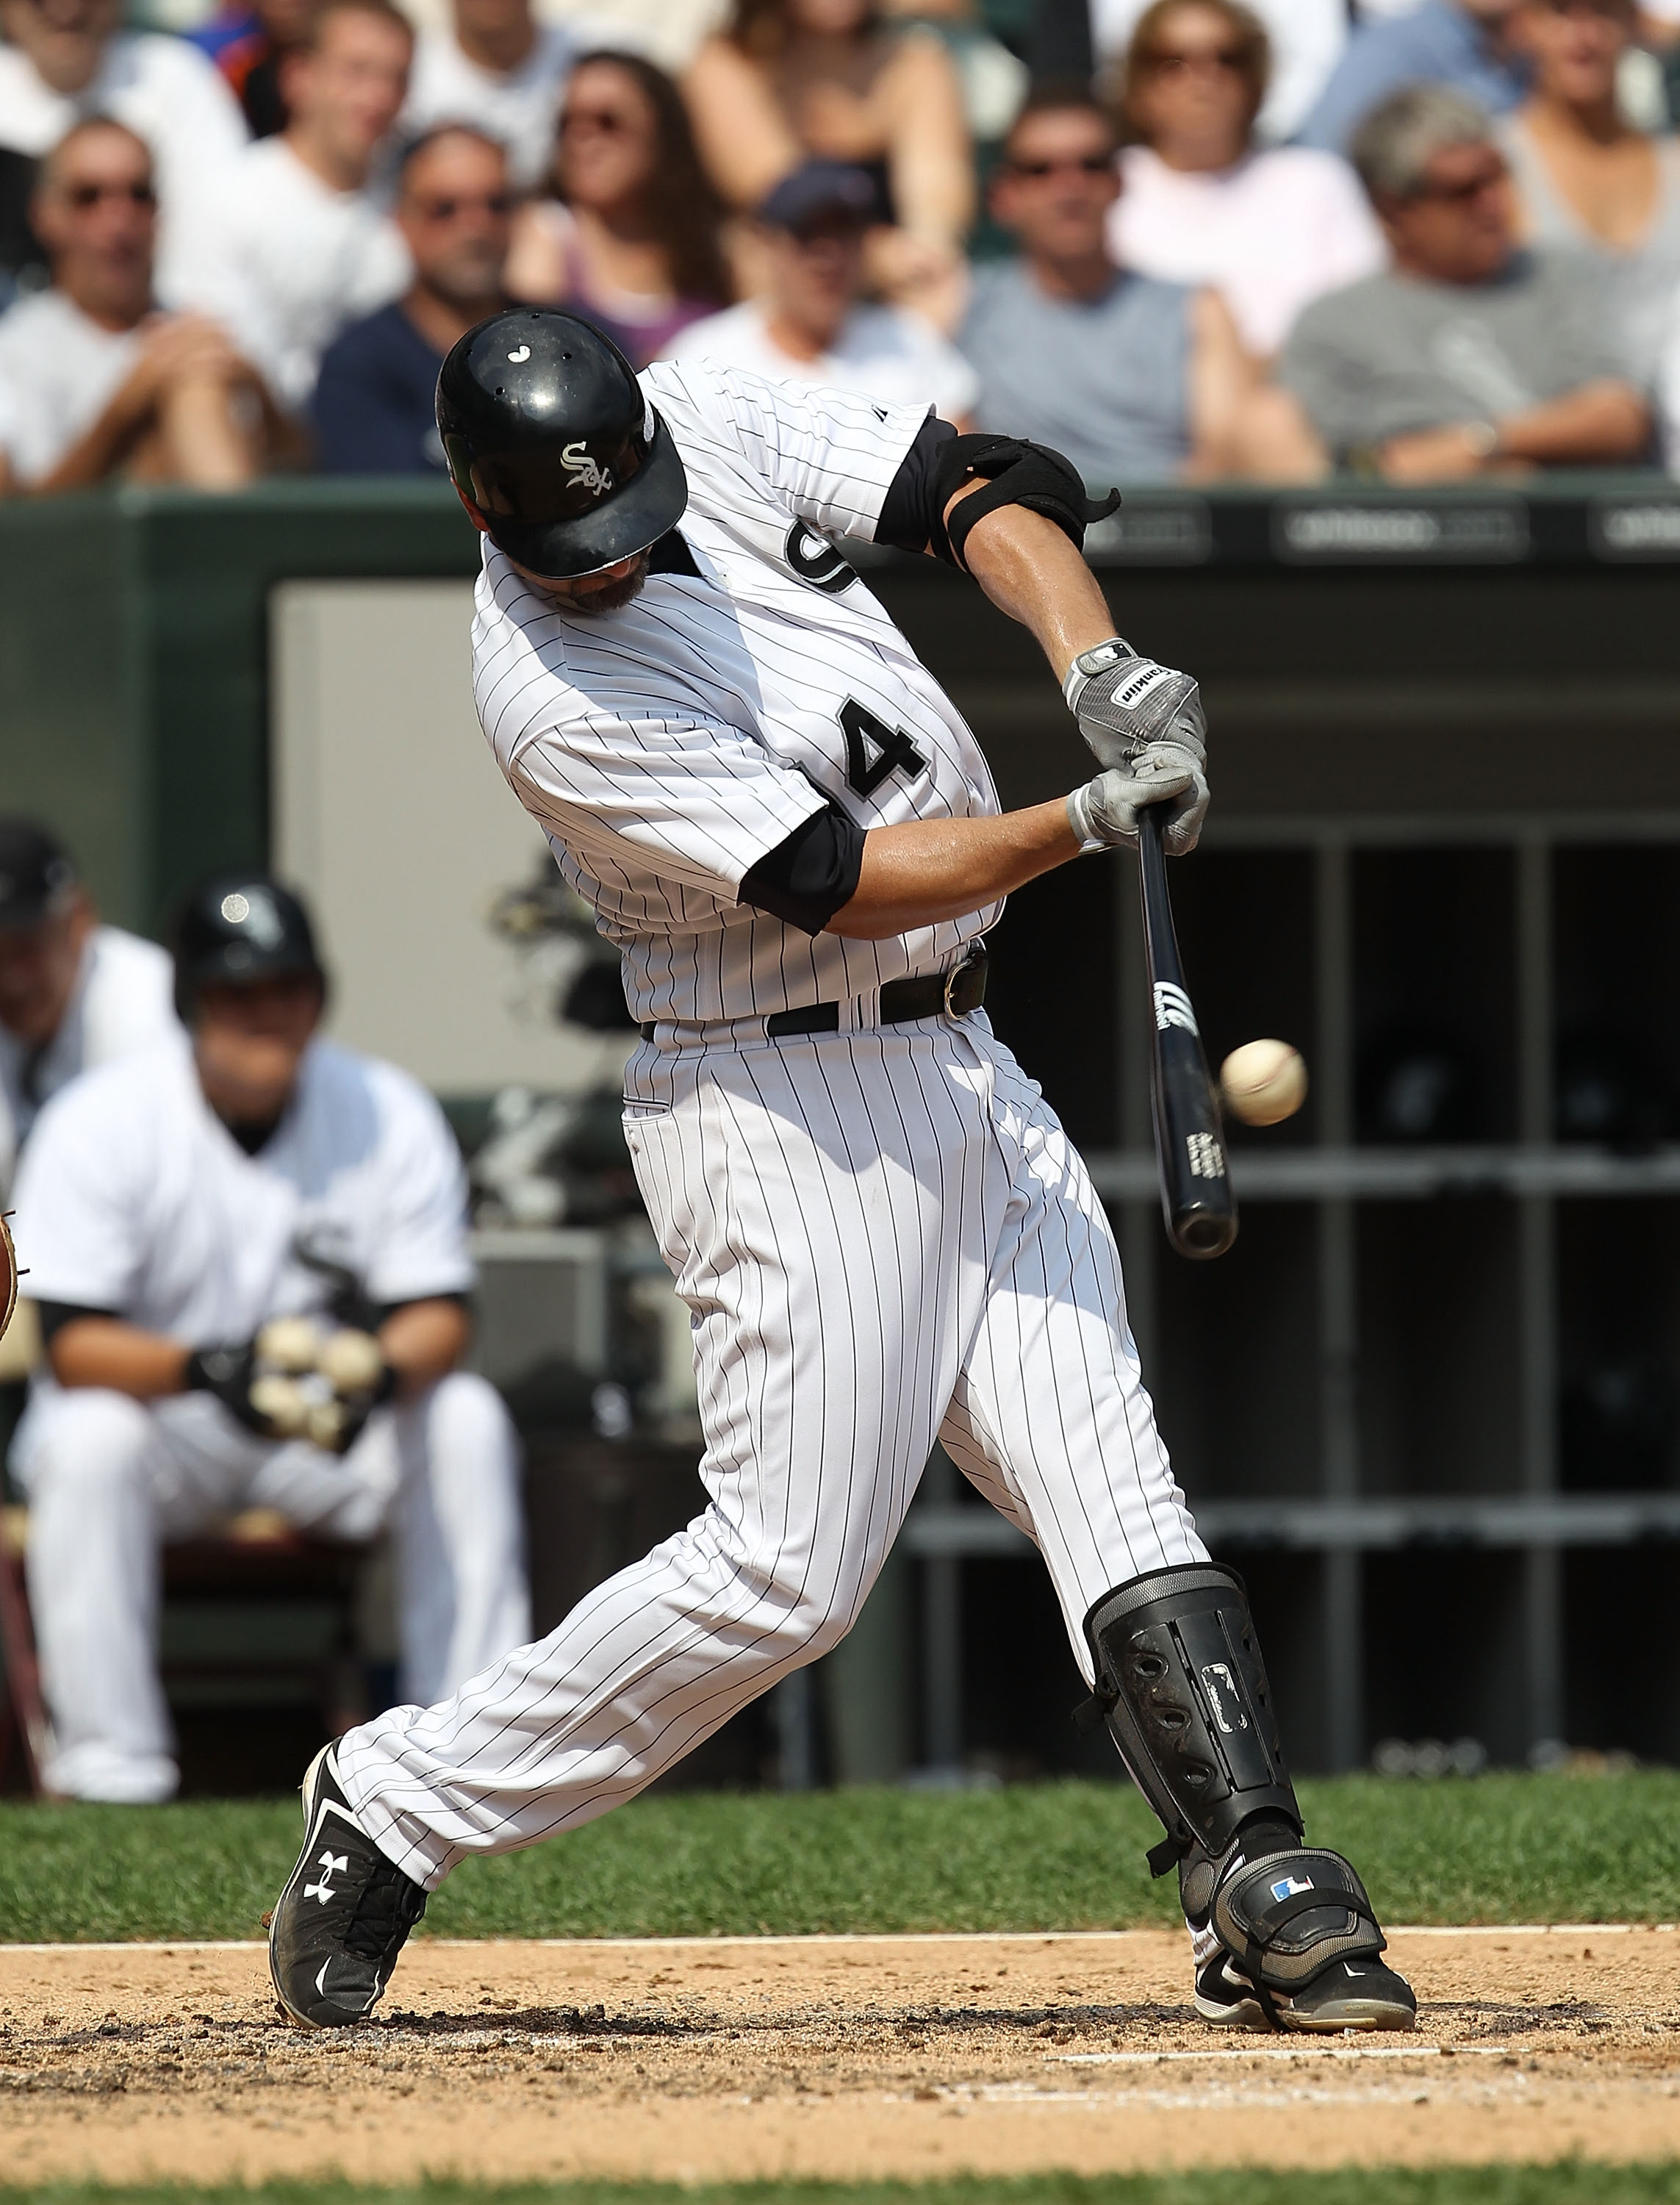 CHICAGO - AUGUST 29: Paul Konerko #14 of the Chicago White Sox hits the ball against the New York Yankees at U.S. Cellular Field on August 29, 2010 in Chicago, Illinois. The Yankees defeated the White Sox 2-1. (Photo by Jonathan Daniel/Getty Images)